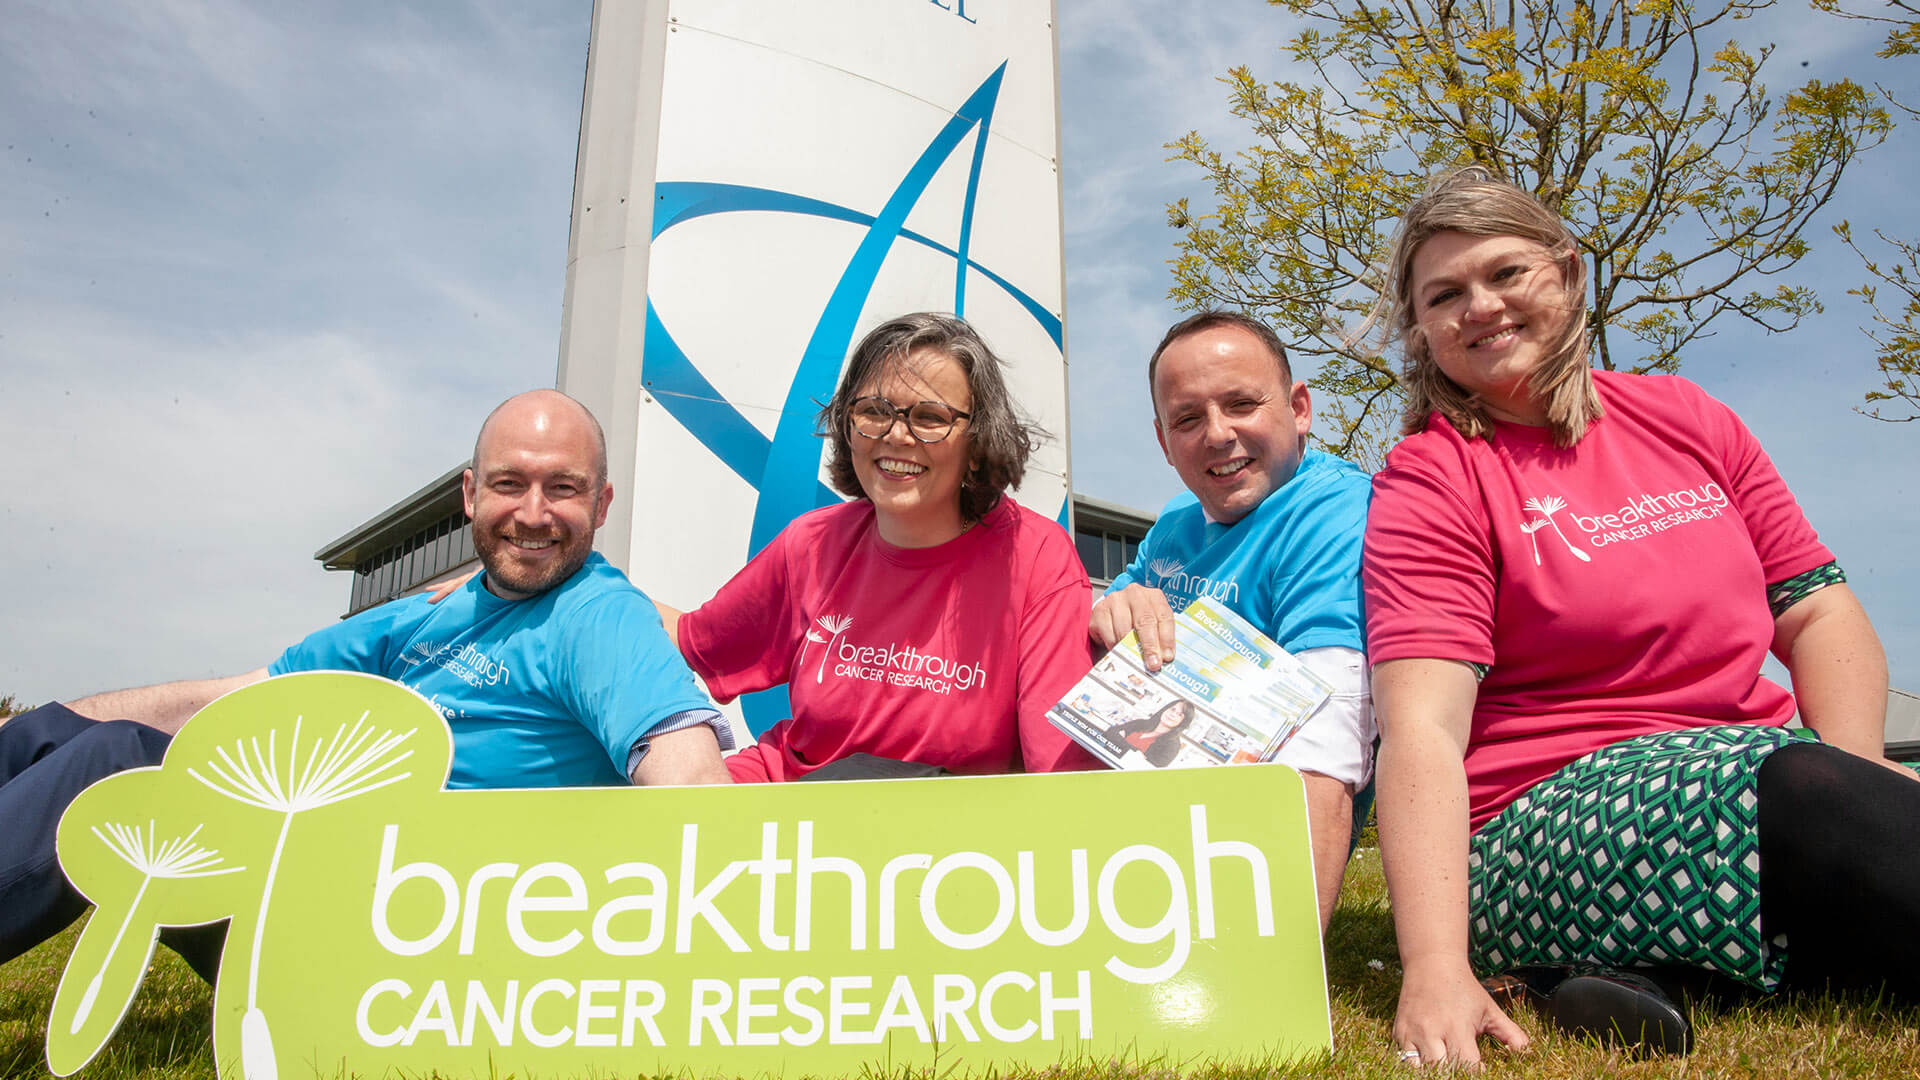 Four people holding a Cancer Research Breakthrough sign in front of the Cork Airport Hotel sign